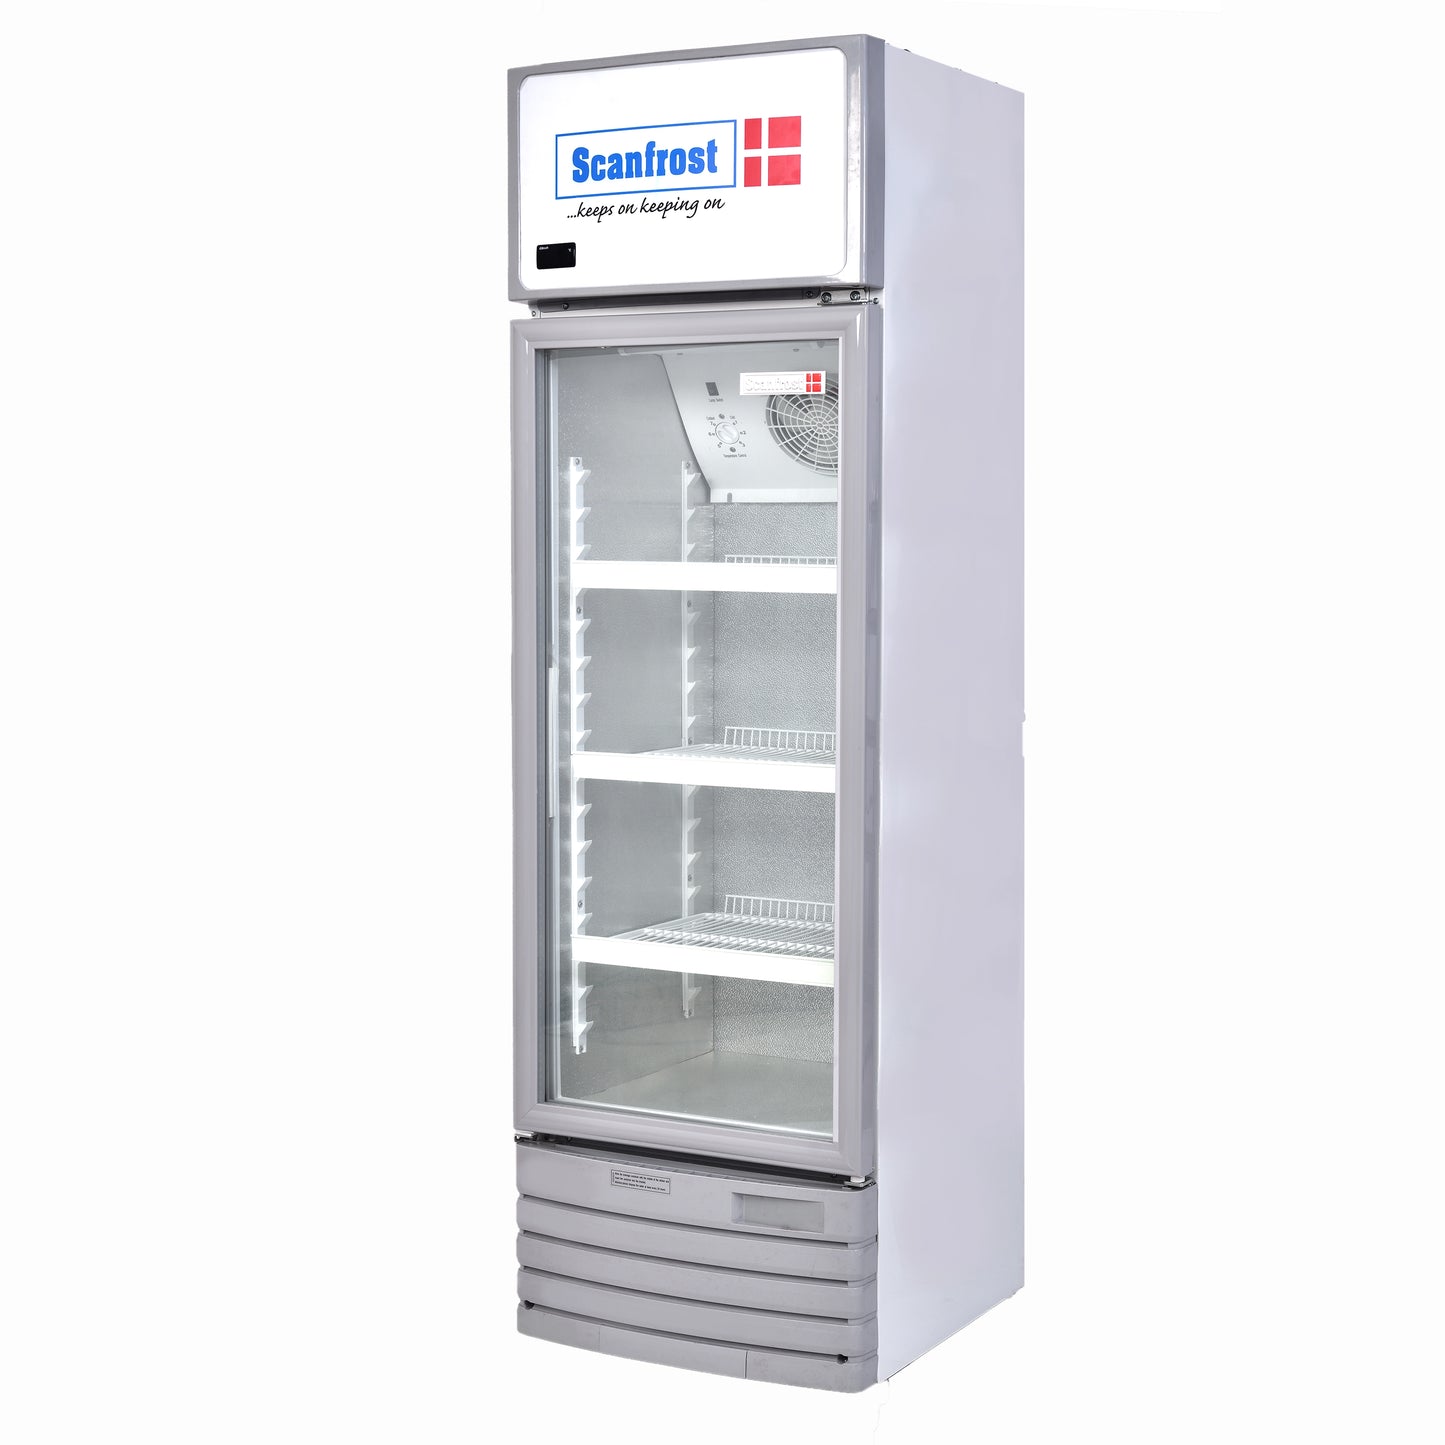 Scanfrost 220Litres Beverage Chiller - SFUC220